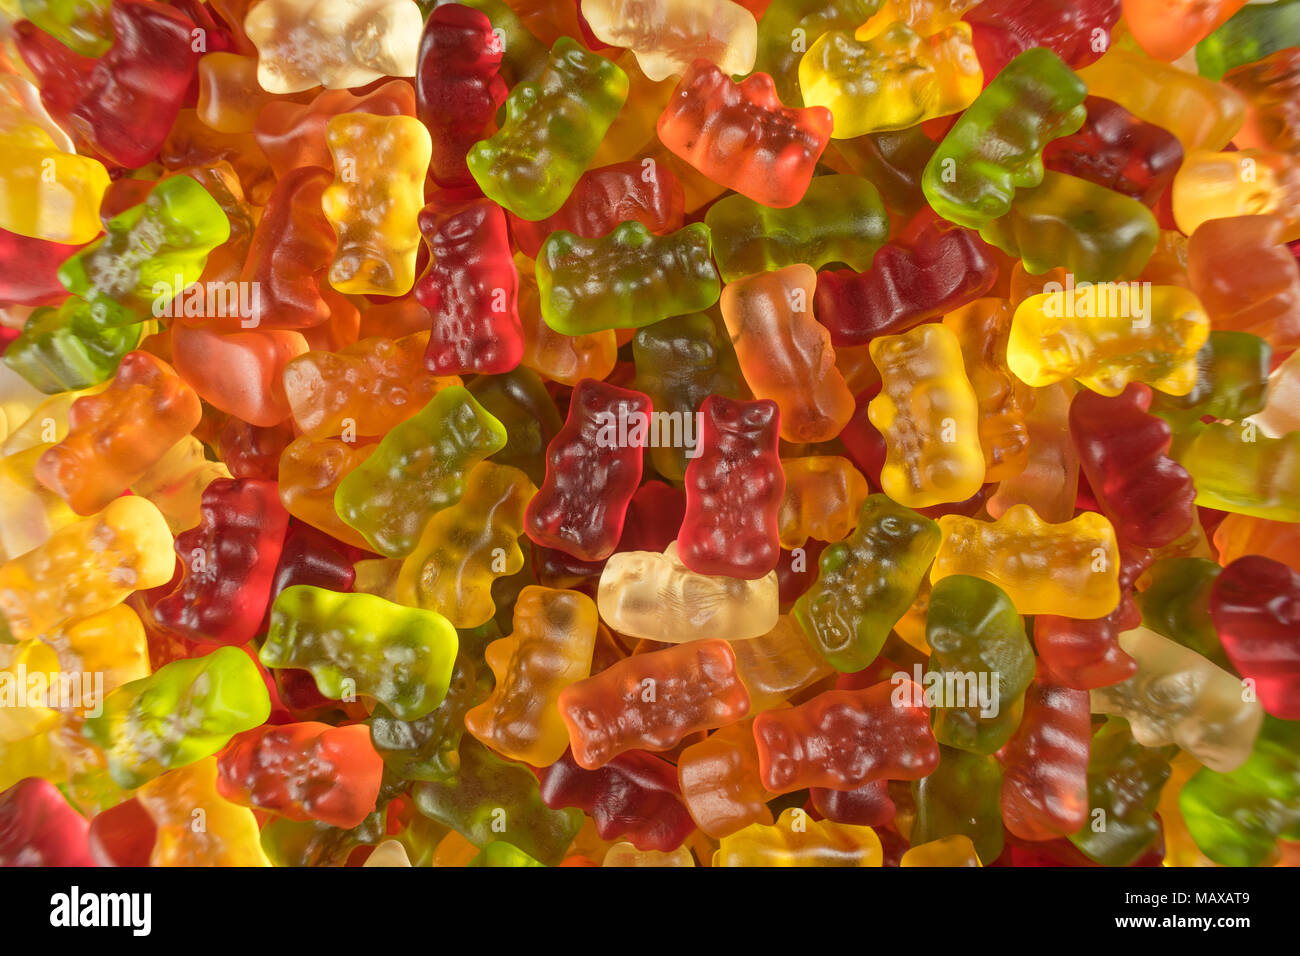 Colourful jelly babies / gummy bear sweets Stock Photo